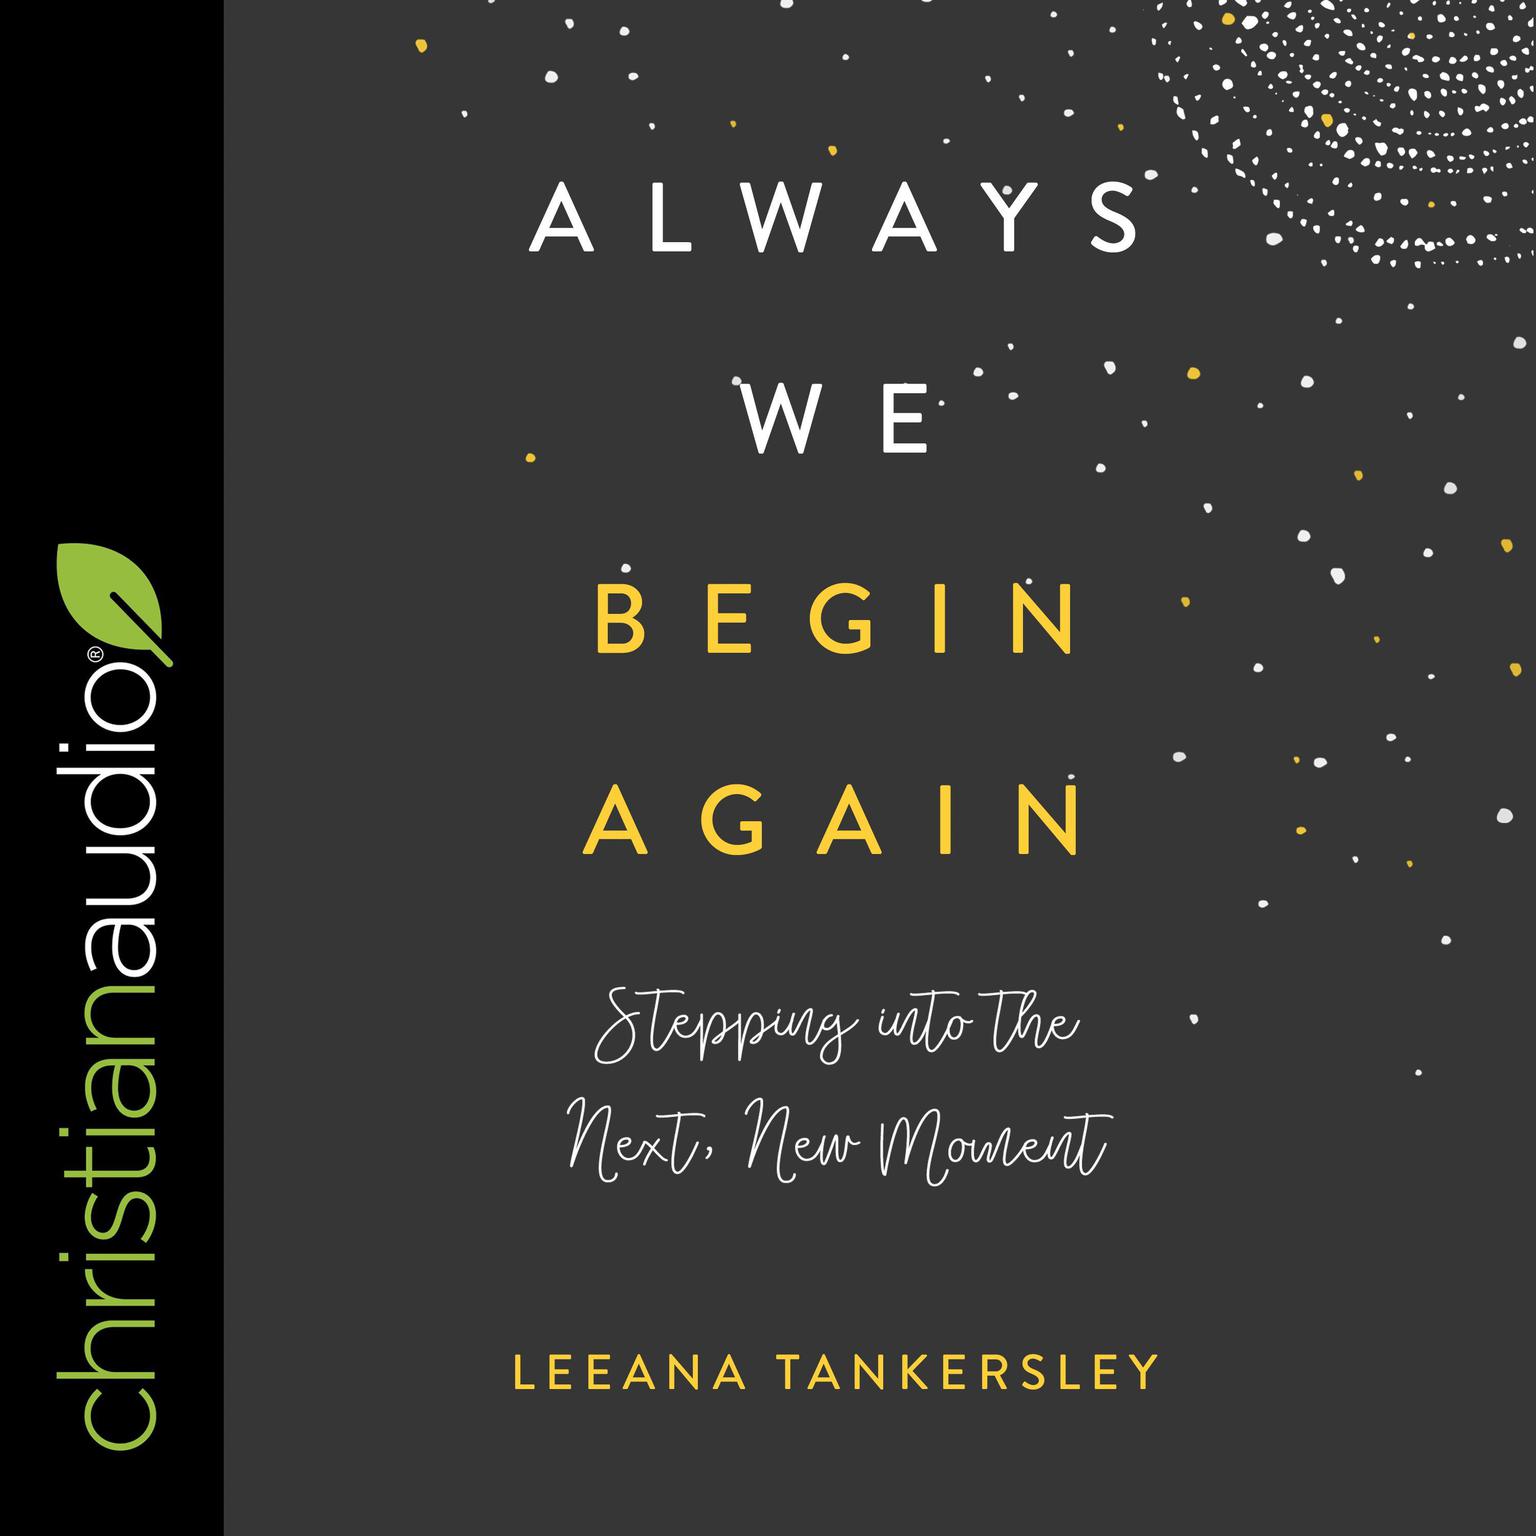 Always We Begin Again: Stepping into the Next, New Moment Audiobook, by Leeana Tankersley